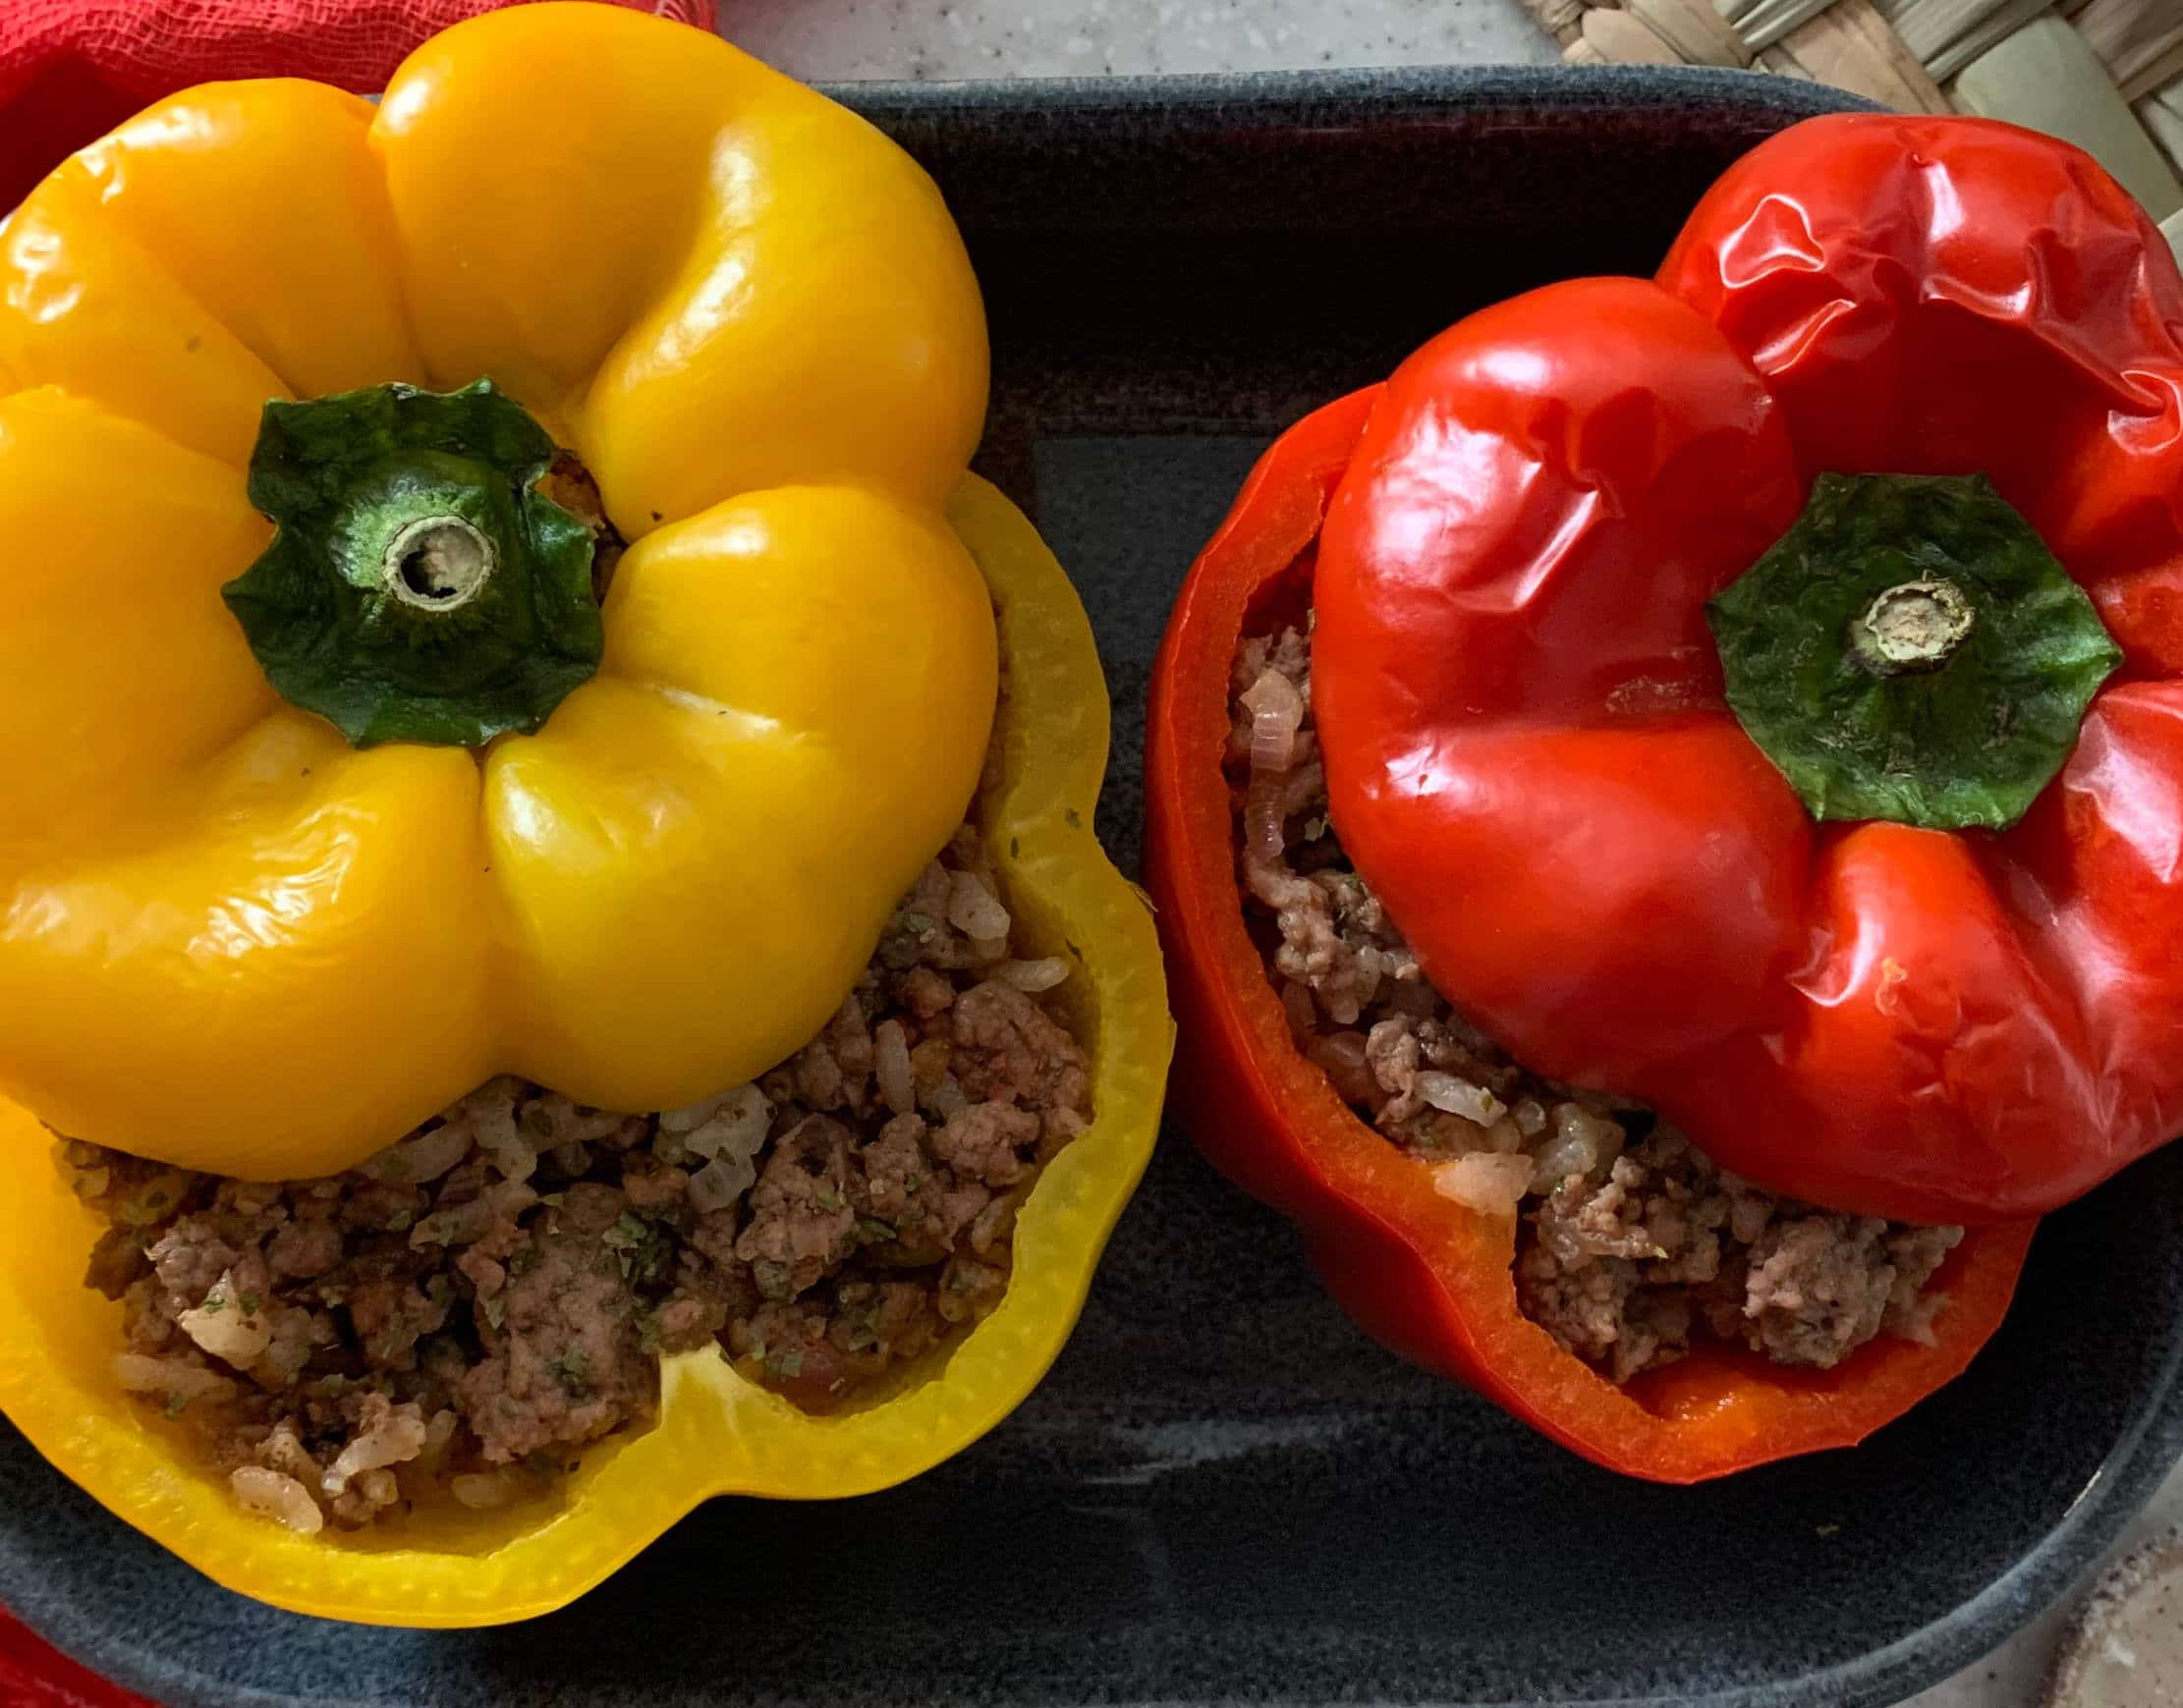 How To Reheat Stuffed Peppers?